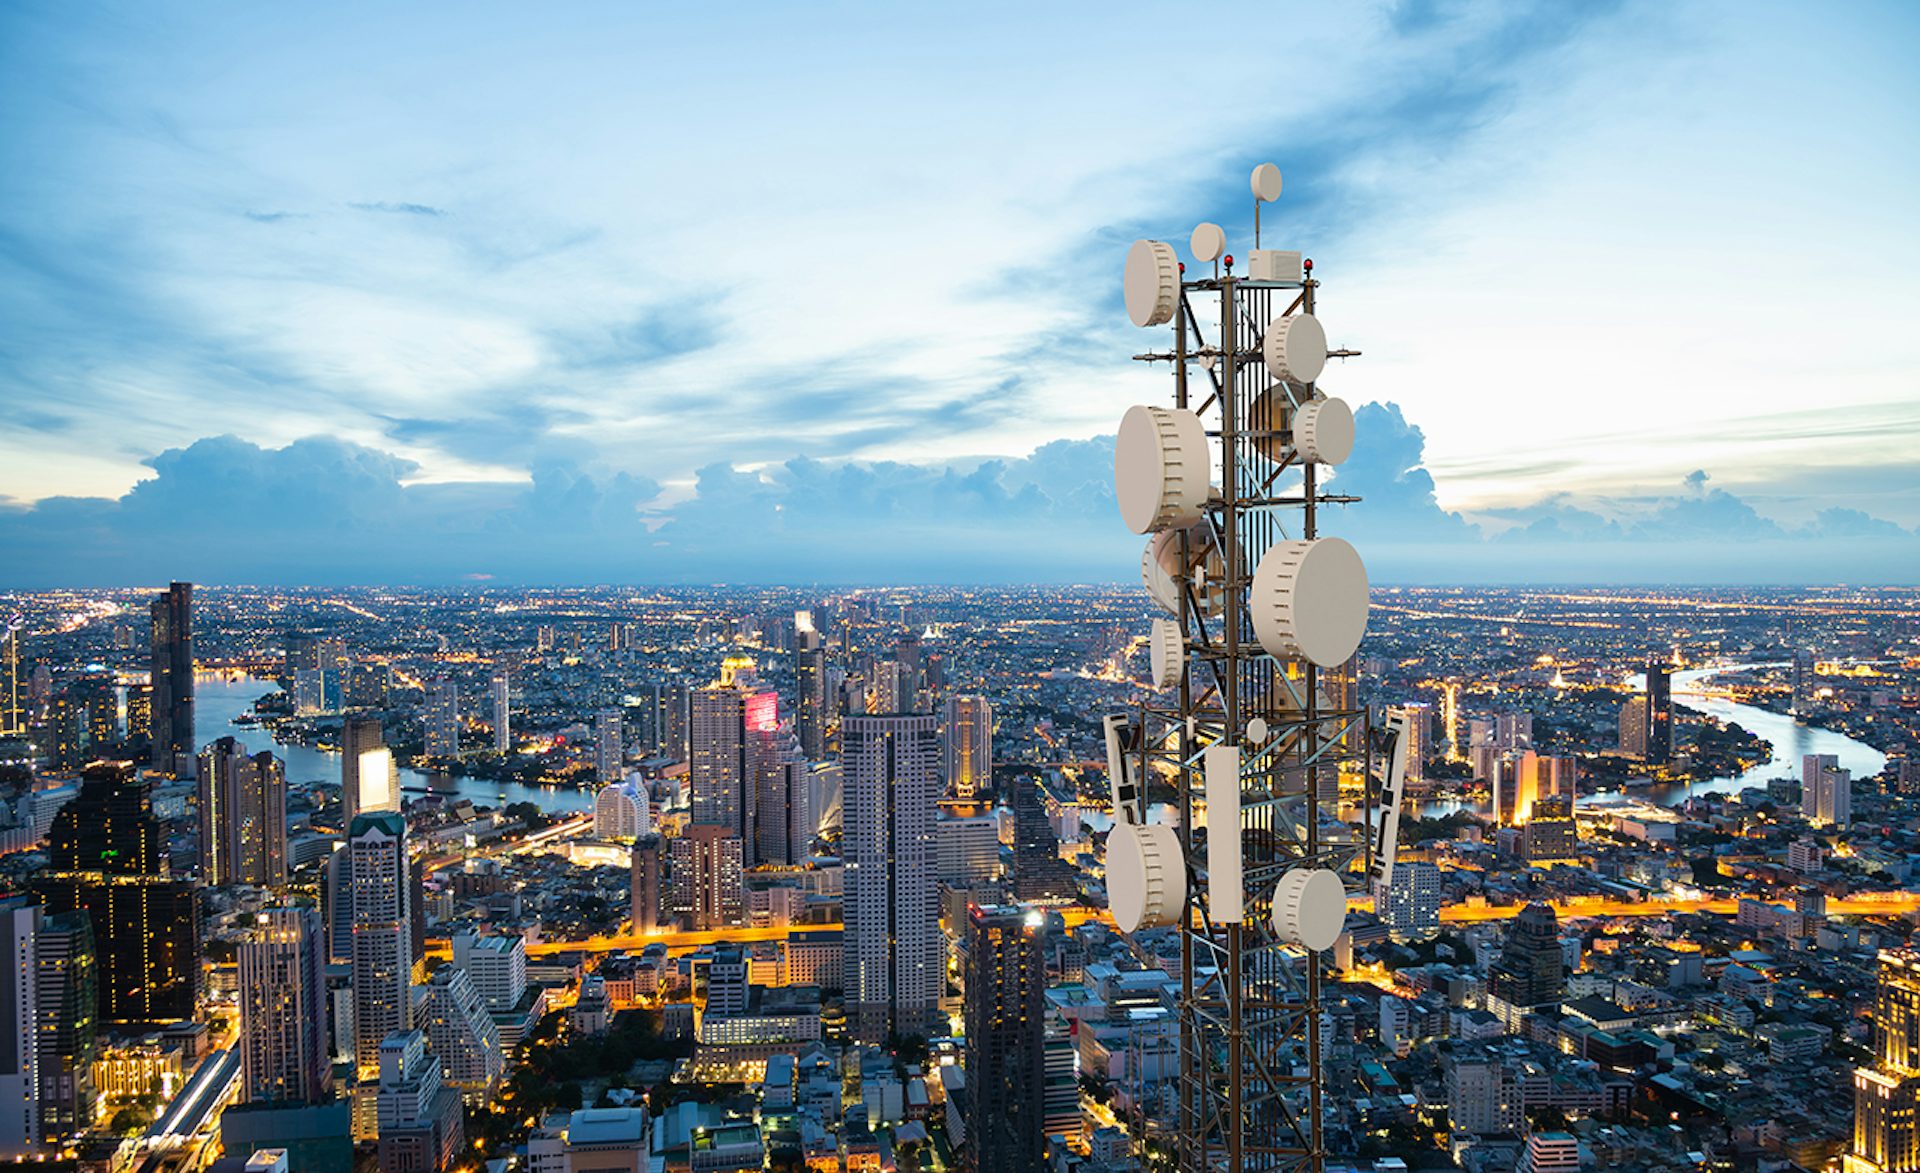 5G tower over city